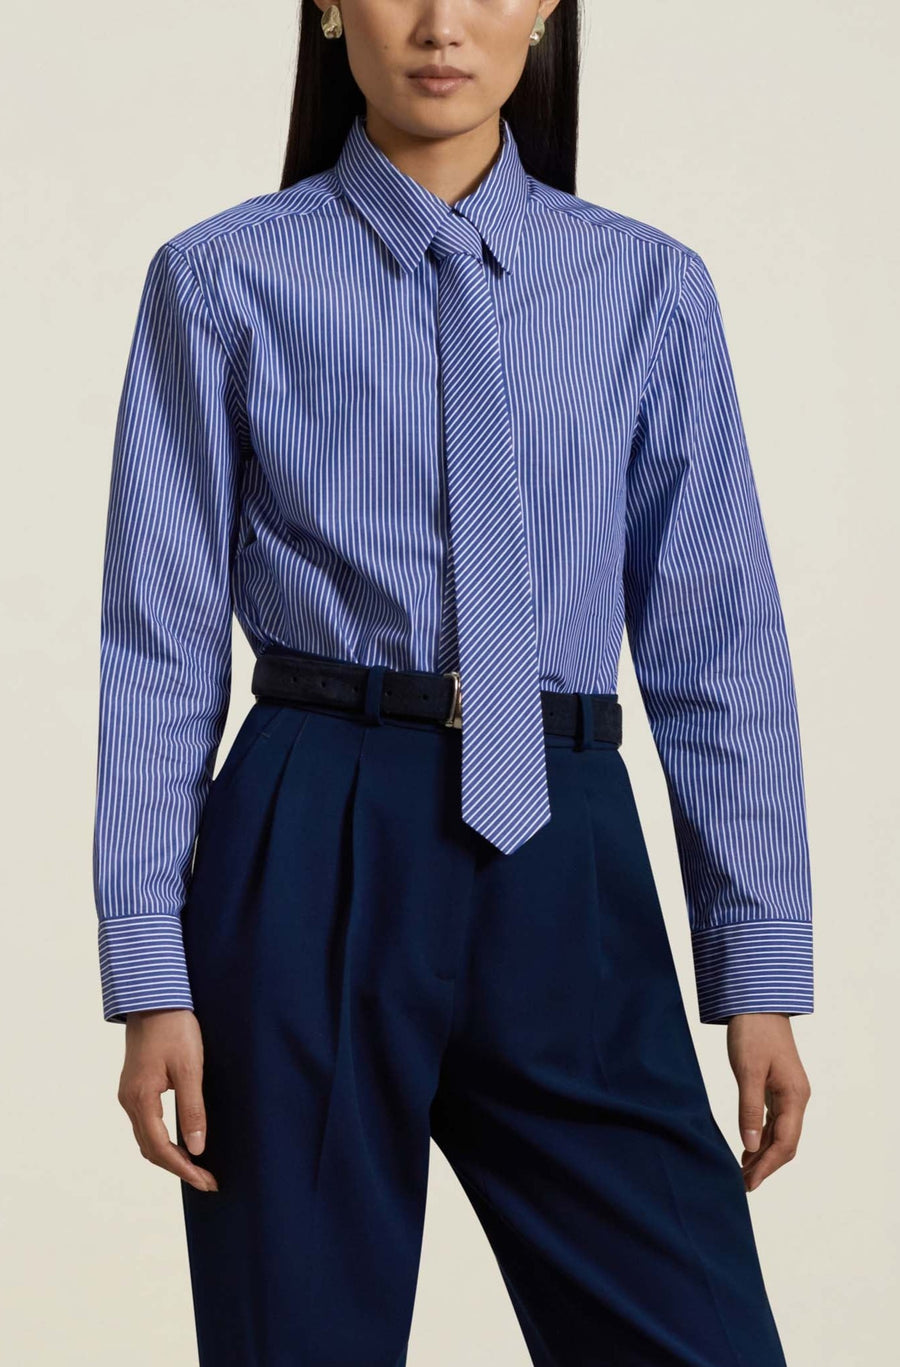 Beau Button Down in Cobalt and White Stripe